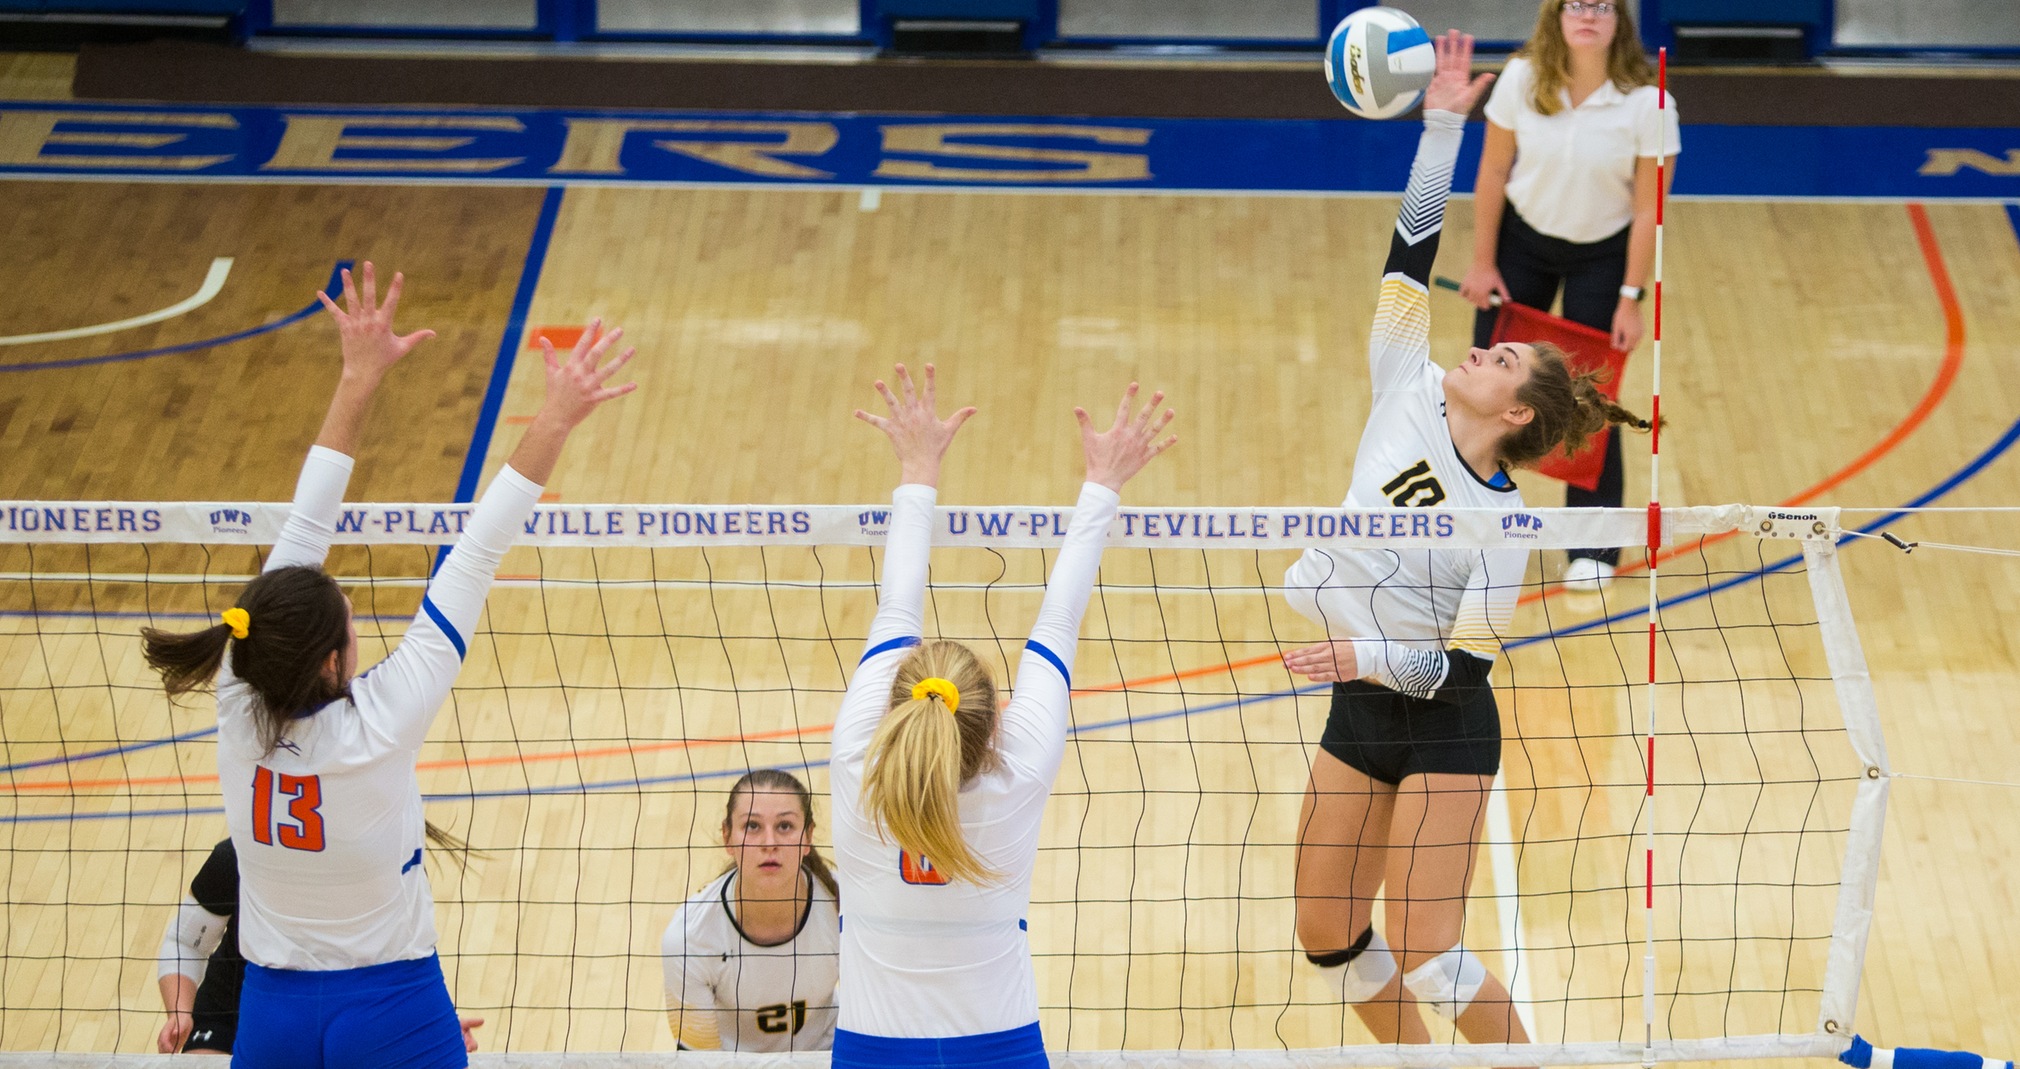 Kendall Enyart hit .333 with eight kills and one block assist against the Pioneers.